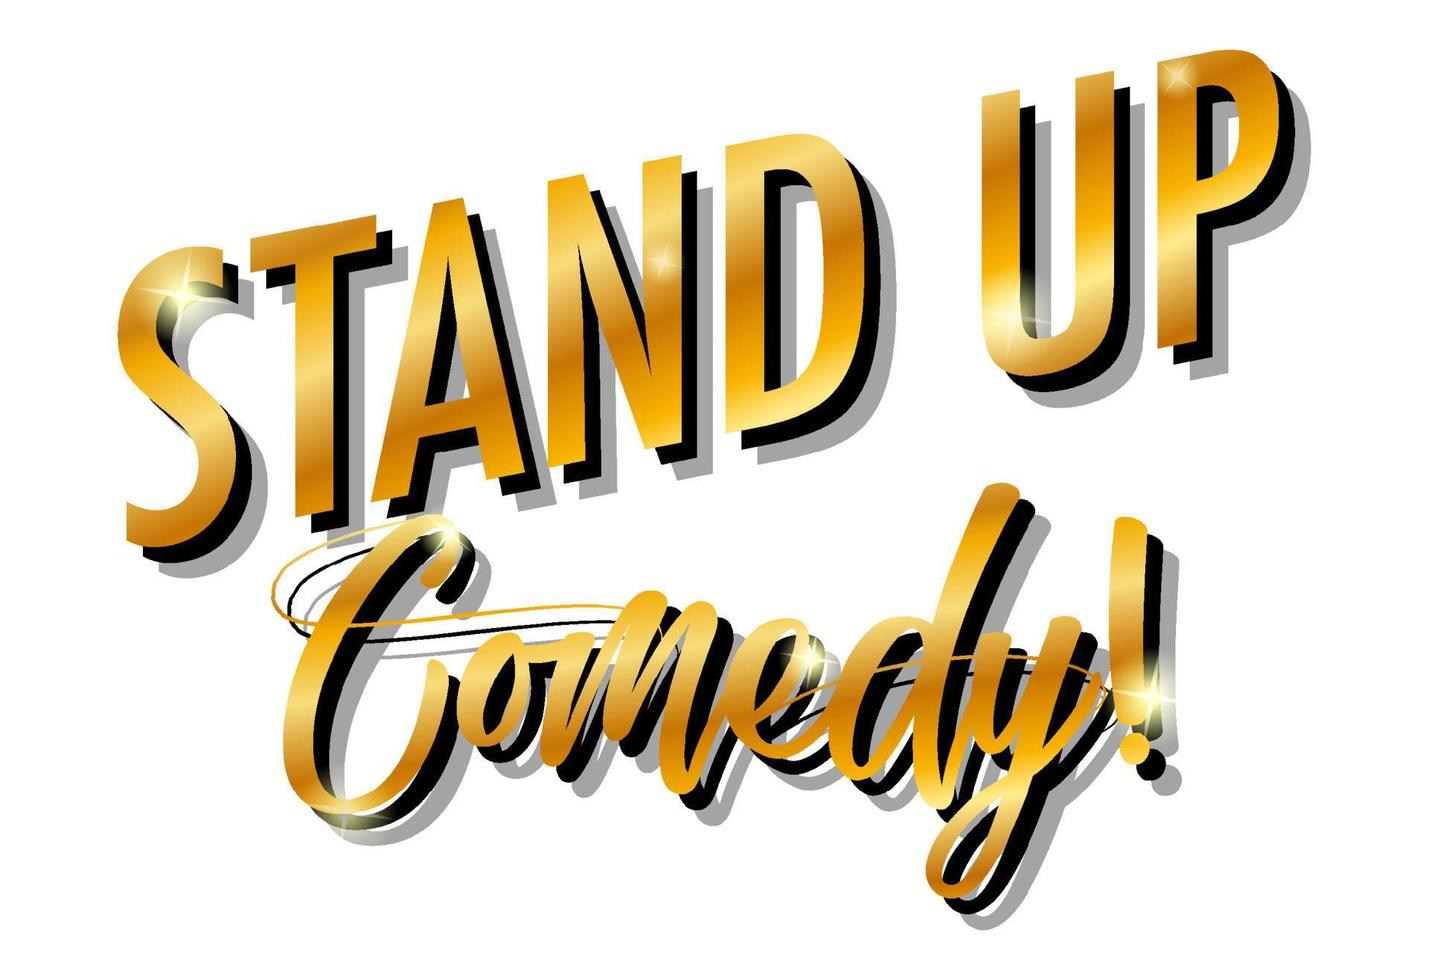 stand-up comedy lettertype ontwerp vector